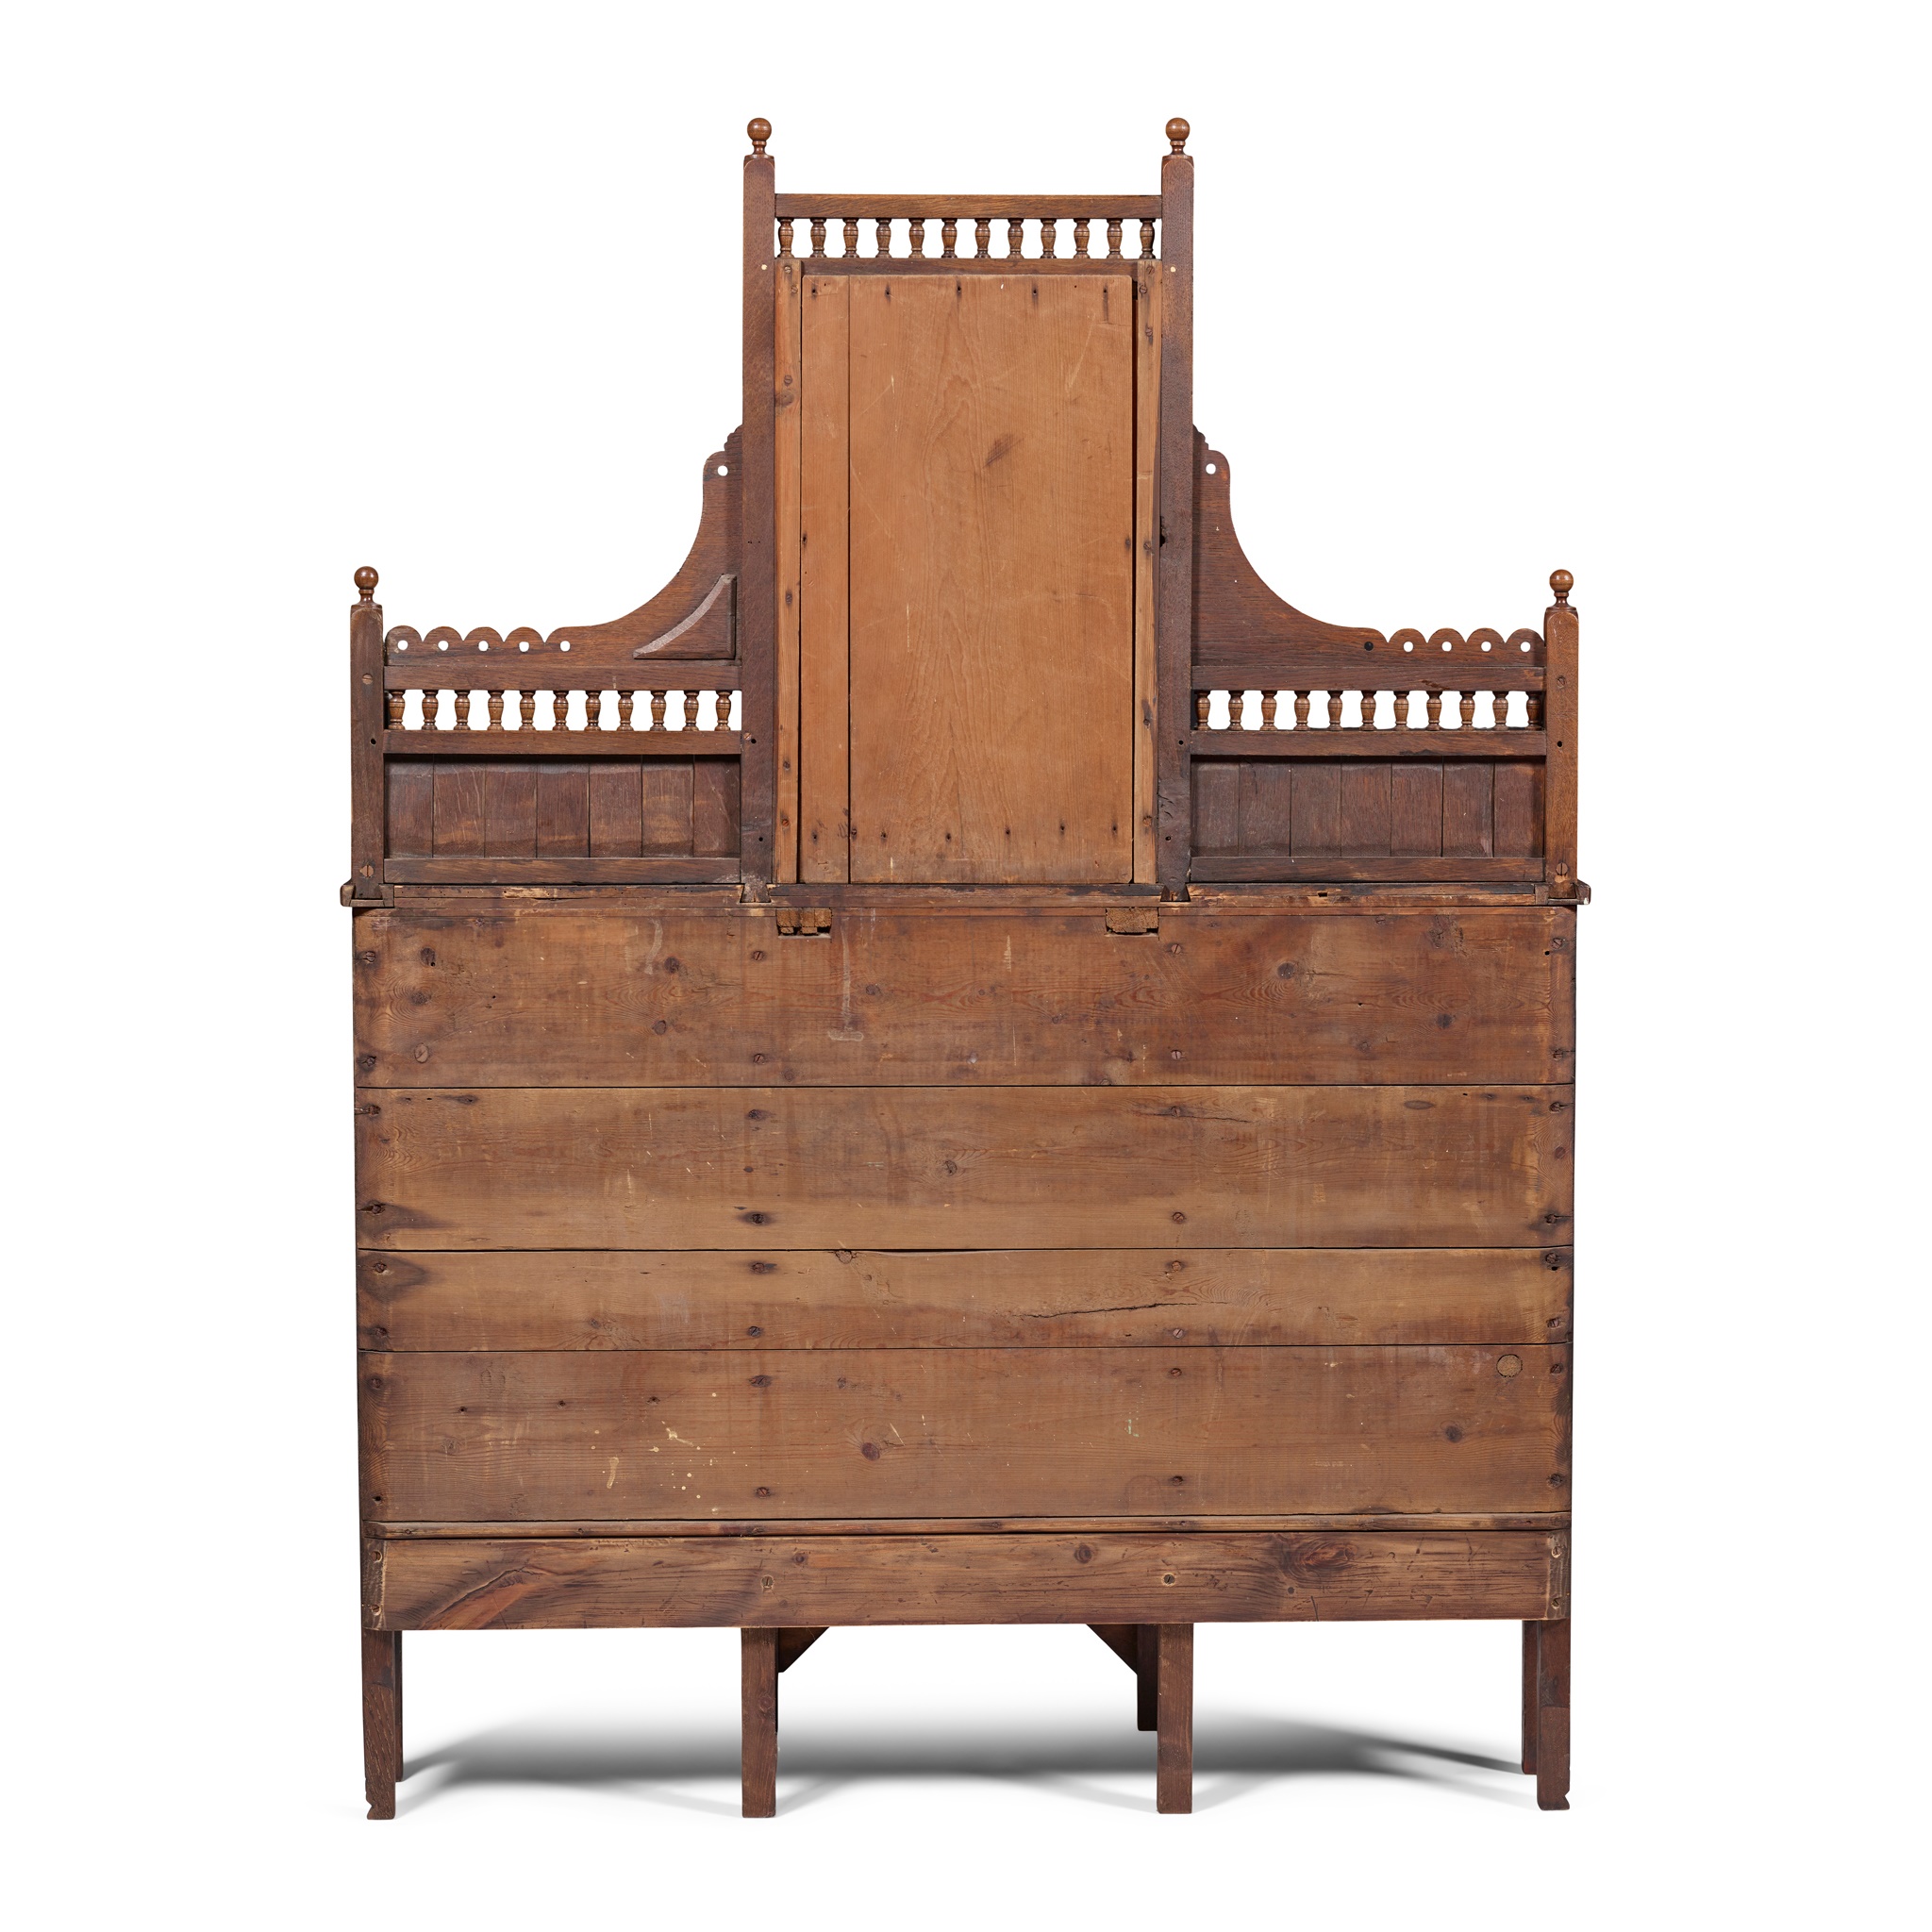 CHRISTOPHER DRESSER (1834-1904) (ATTRIBUTED DESIGNER) AESTHETIC MOVEMENT SIDE CABINET, CIRCA 1880 - Image 2 of 3